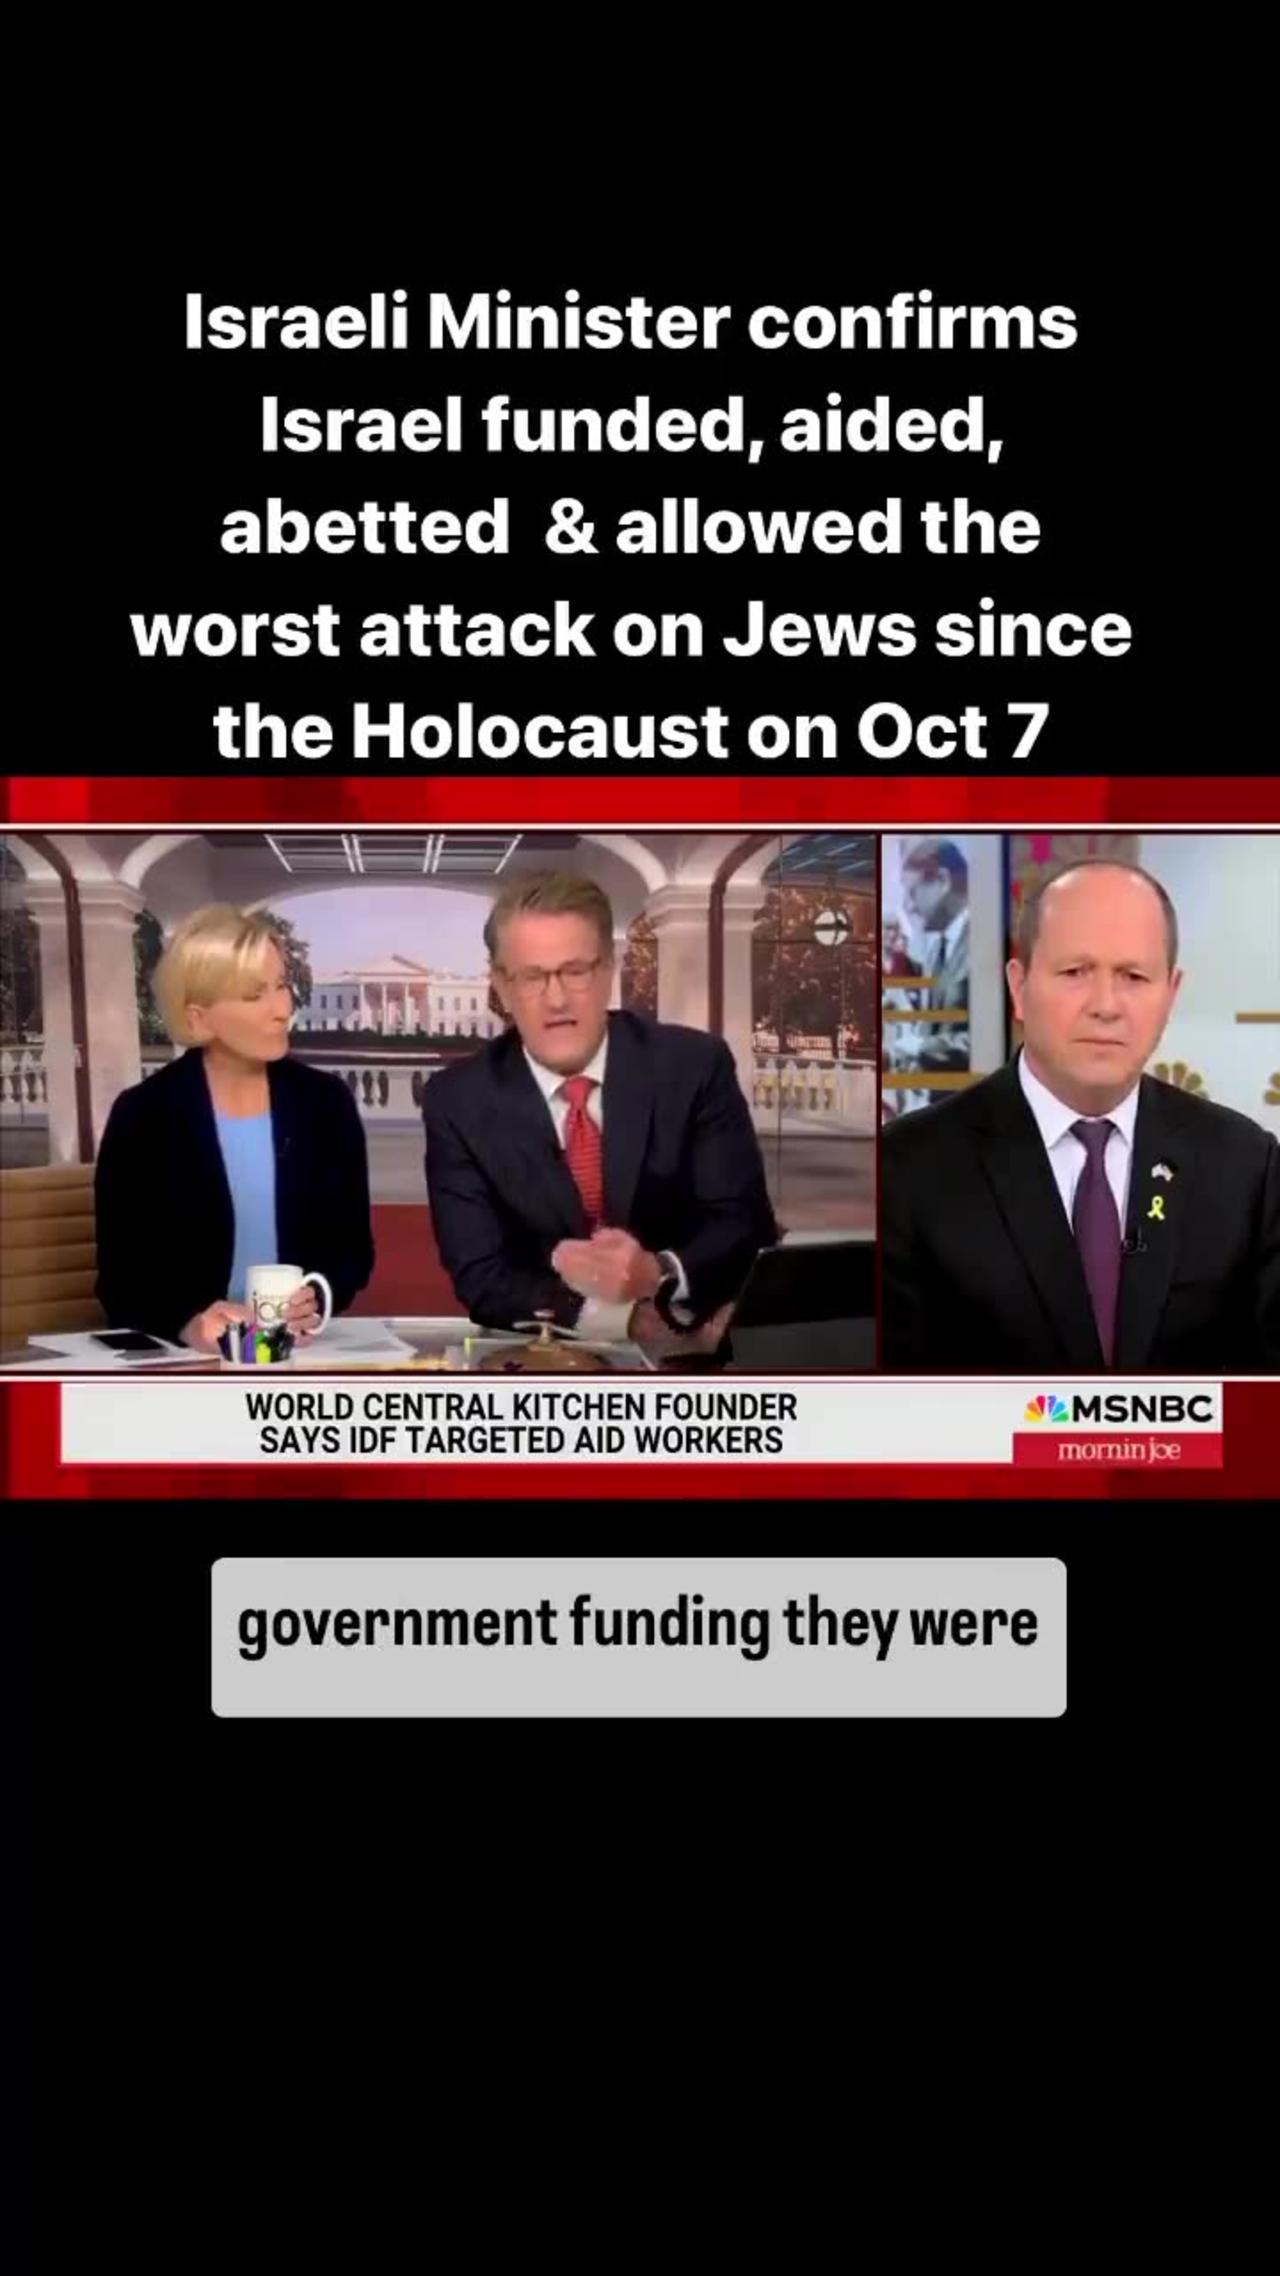 Israeli Minister confirms Israel funded, aided, abetted & allowed the worst attack on Jews since the Holocaust on Oct 7